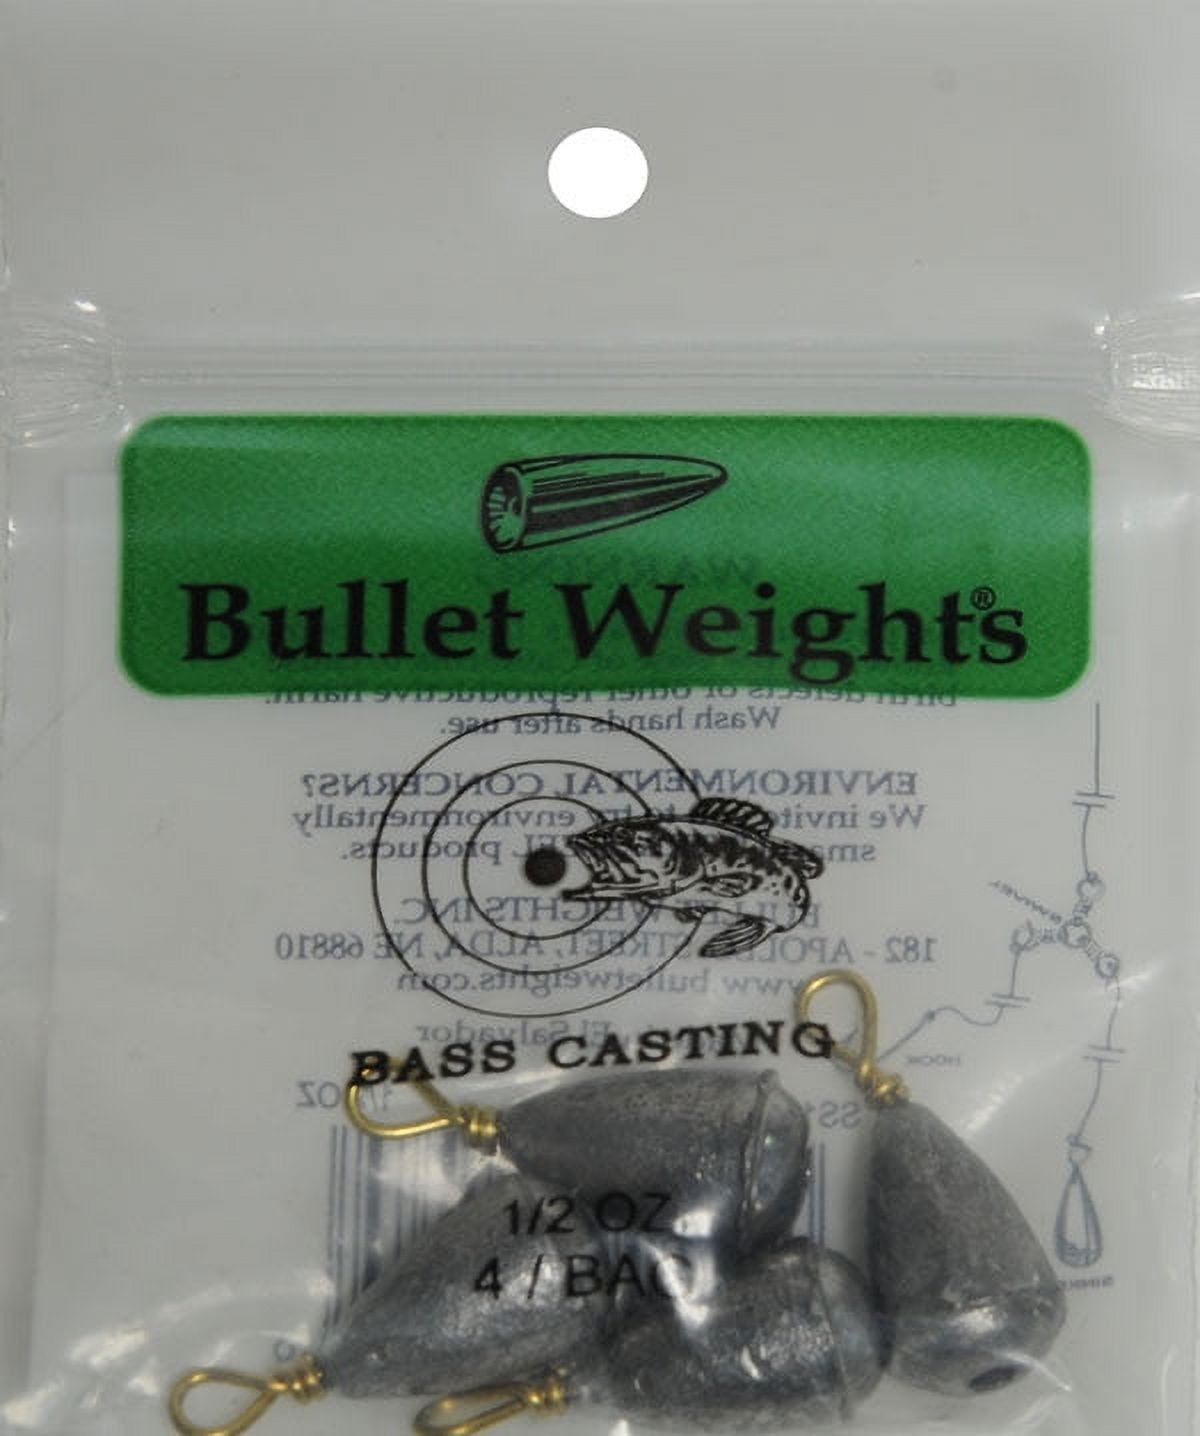 Bullet Weights® SS12-24 Lead Bass Casting Size 6, 1/2 oz Fishing